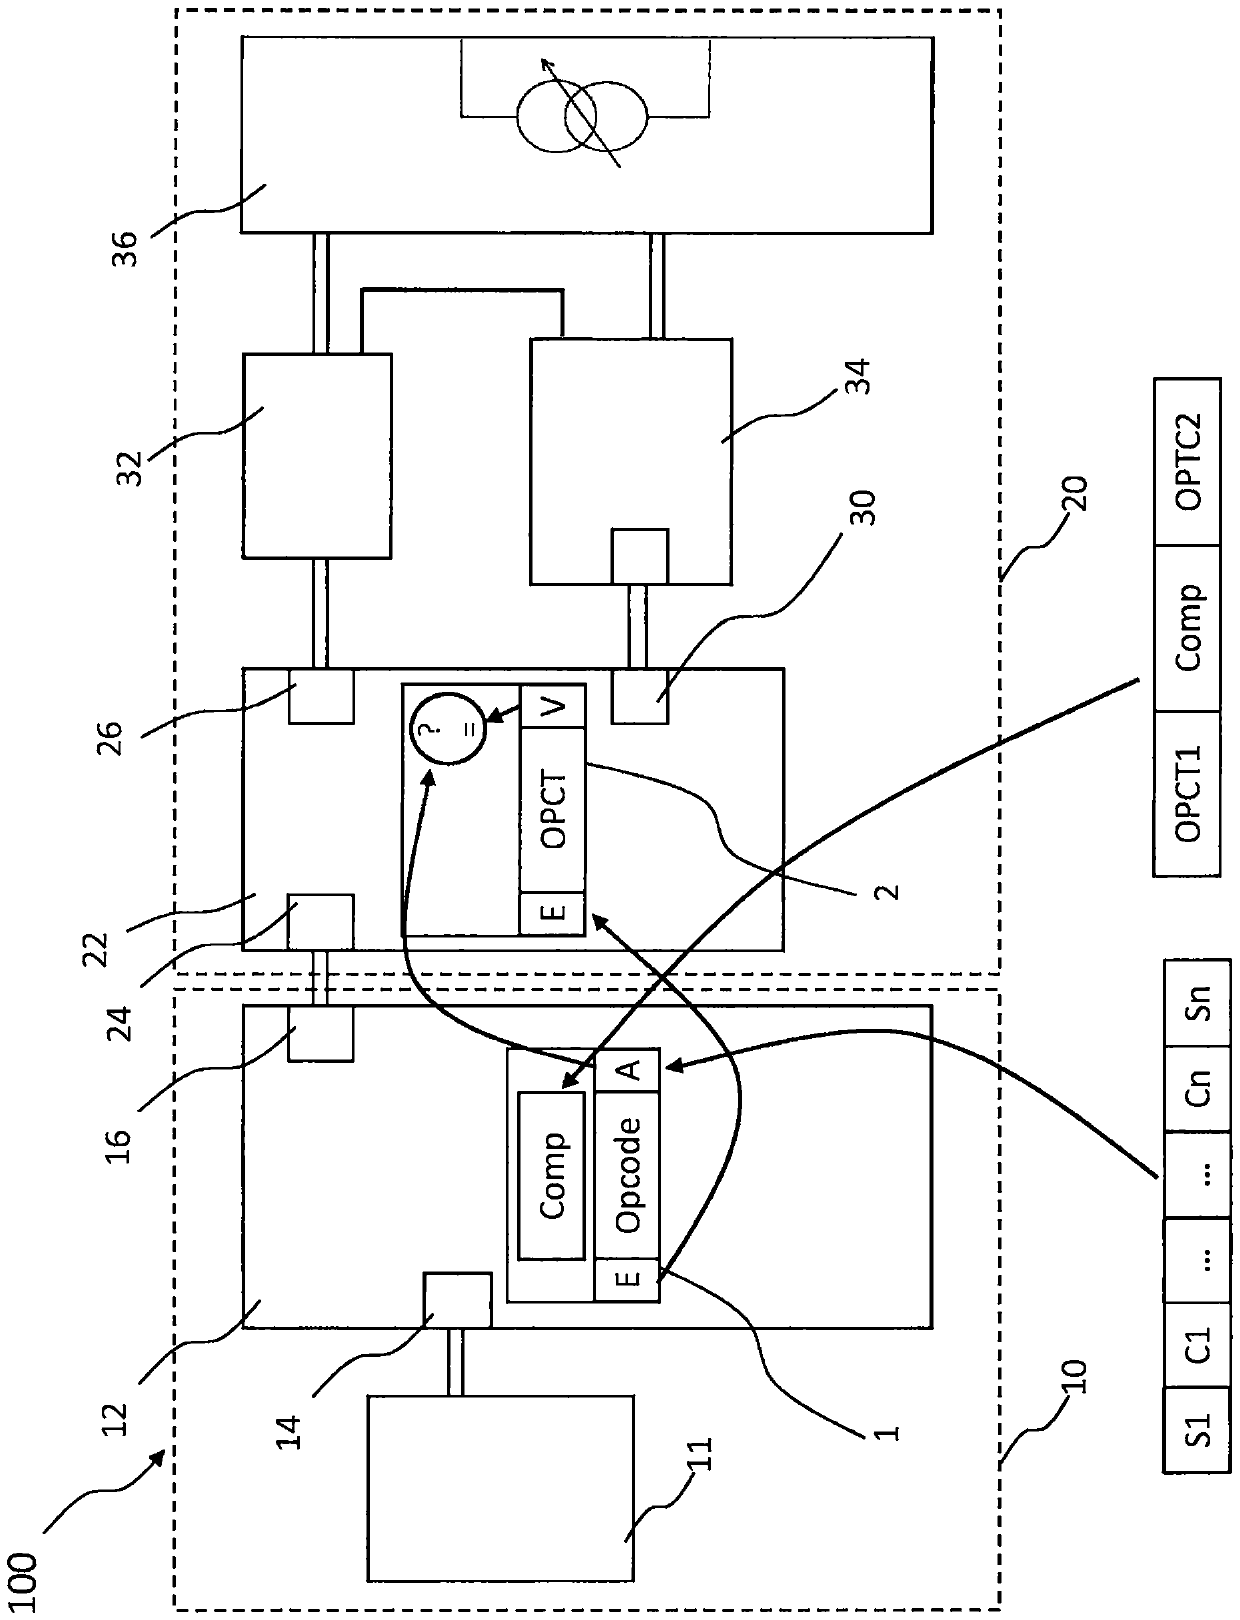 Electronic circuit for a field device used in automation technology